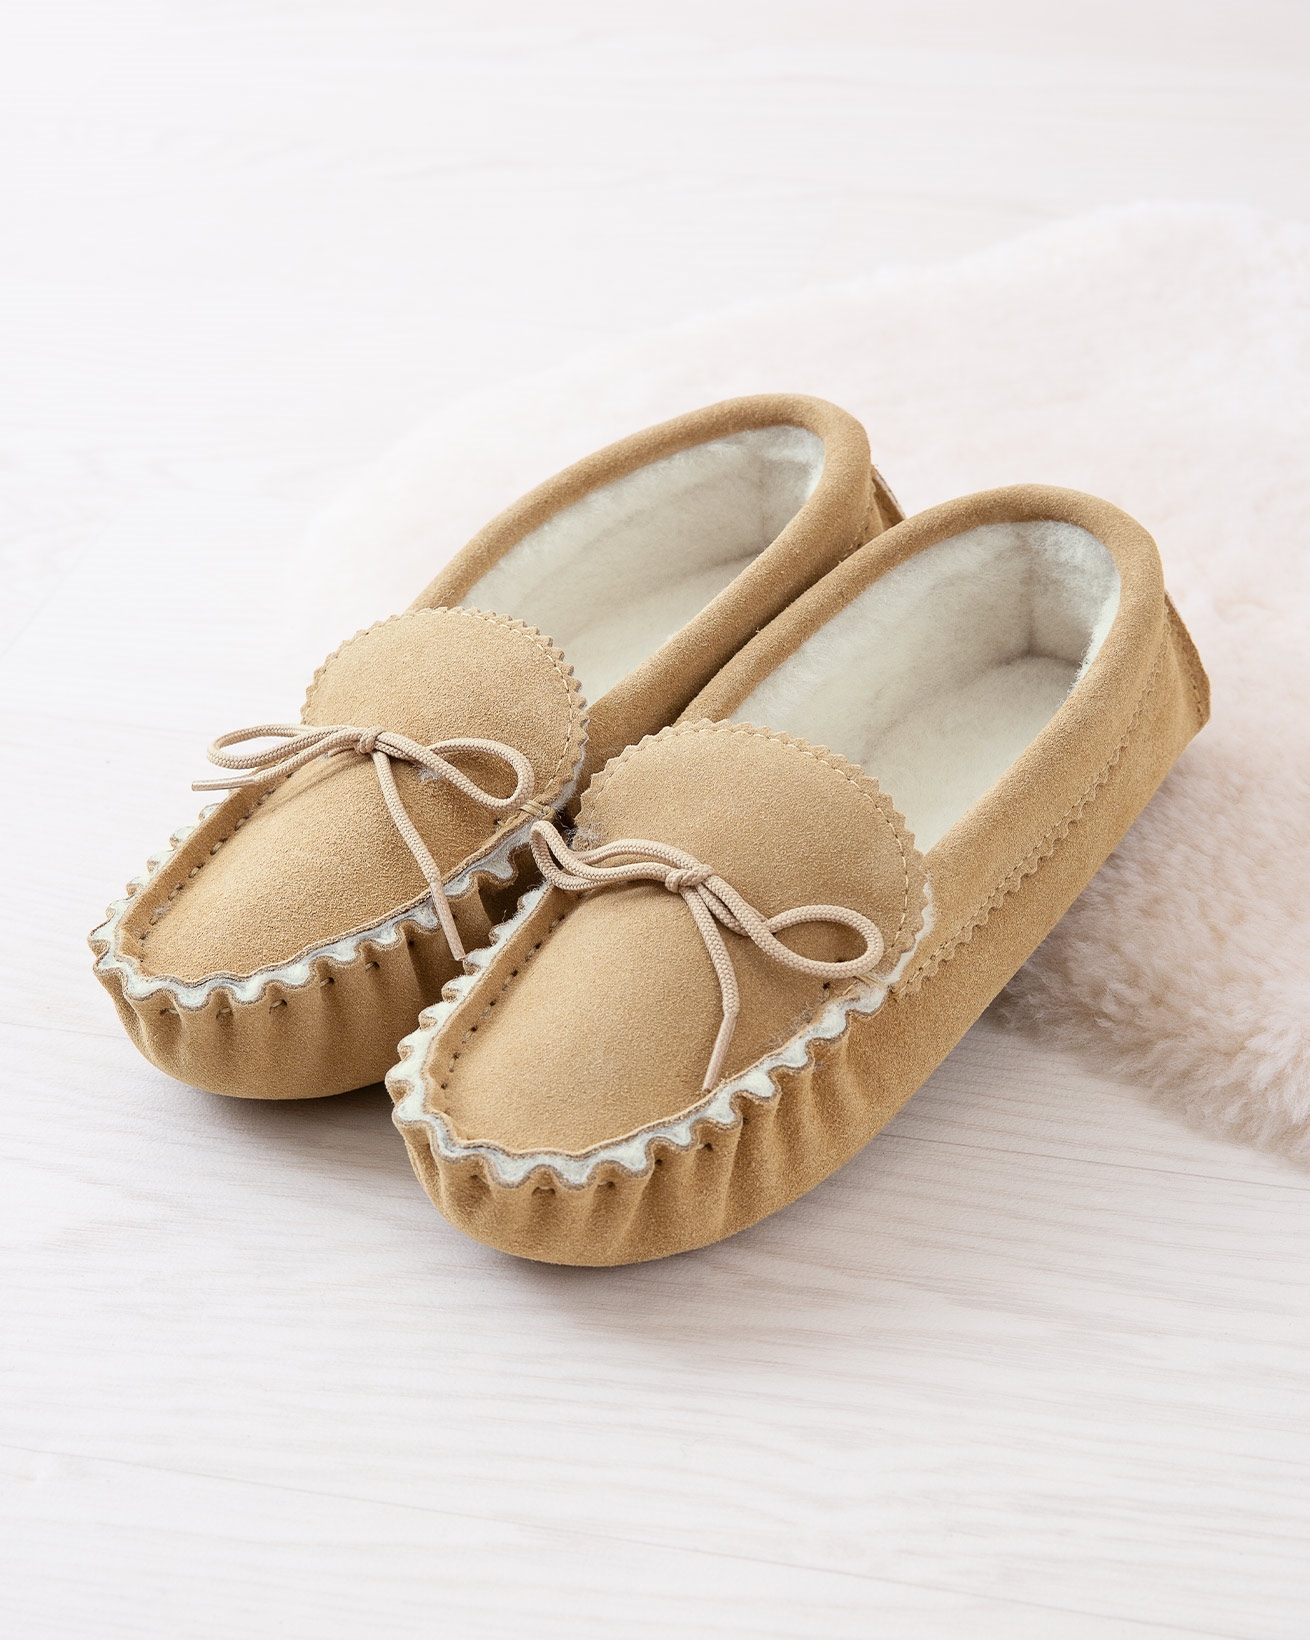 moccasin soles